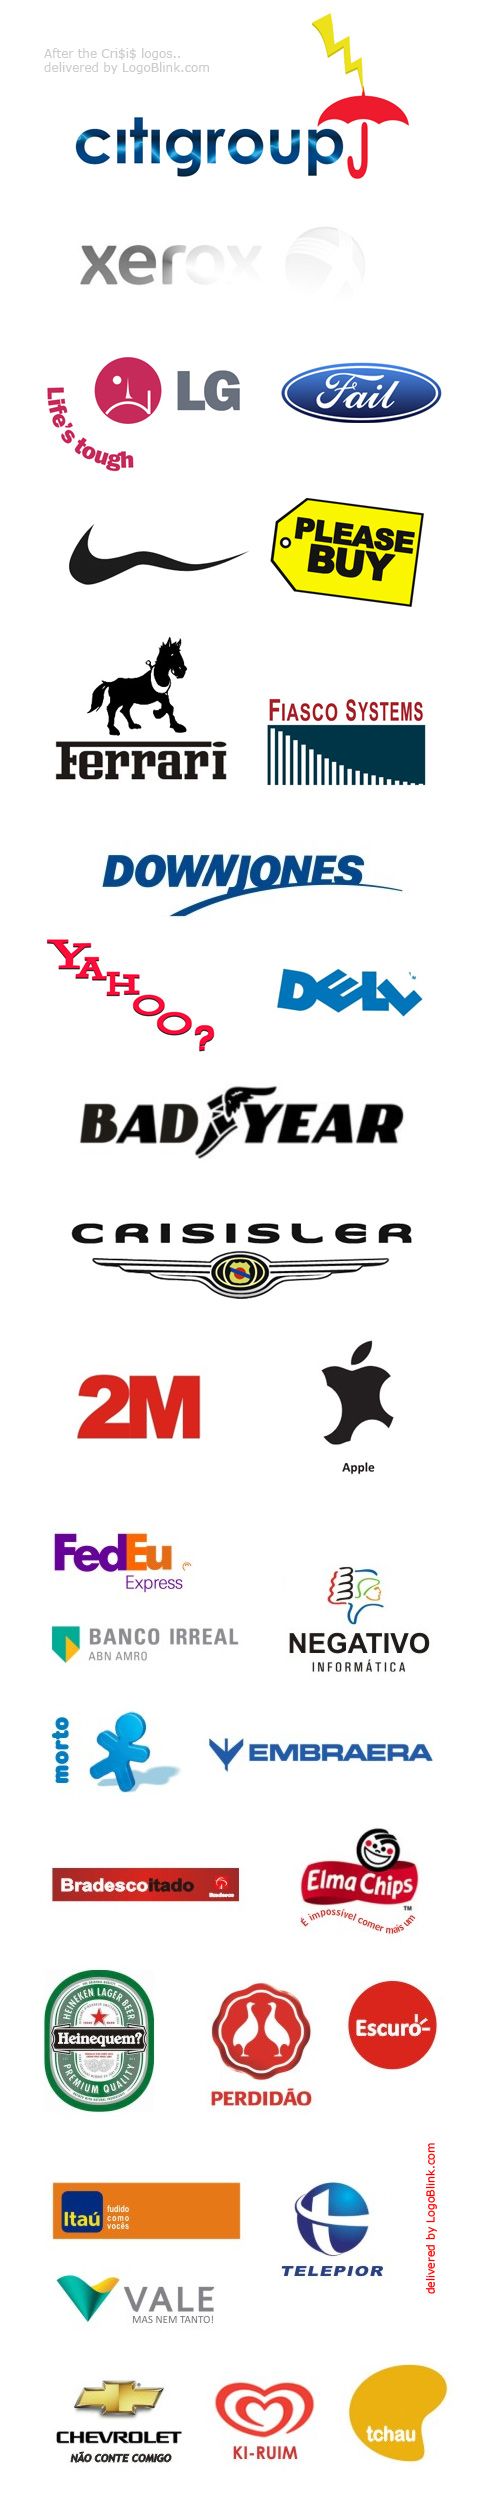 after-the-crisis-logotypes